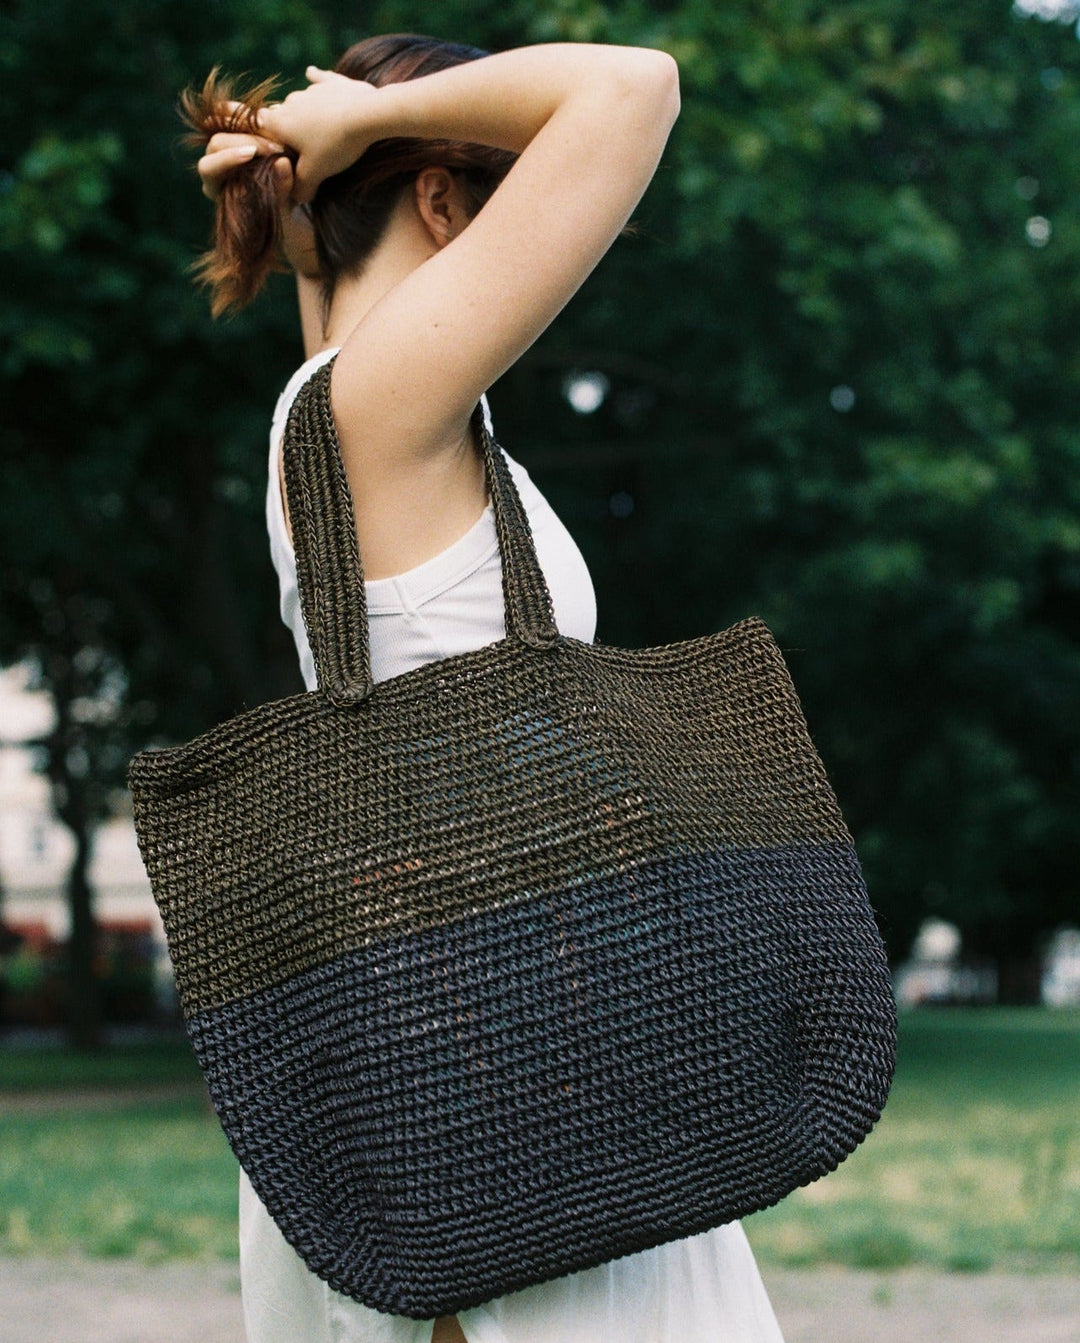 Bicolor Fique Tote Bag - Black/Green by Matamba at White Label Project